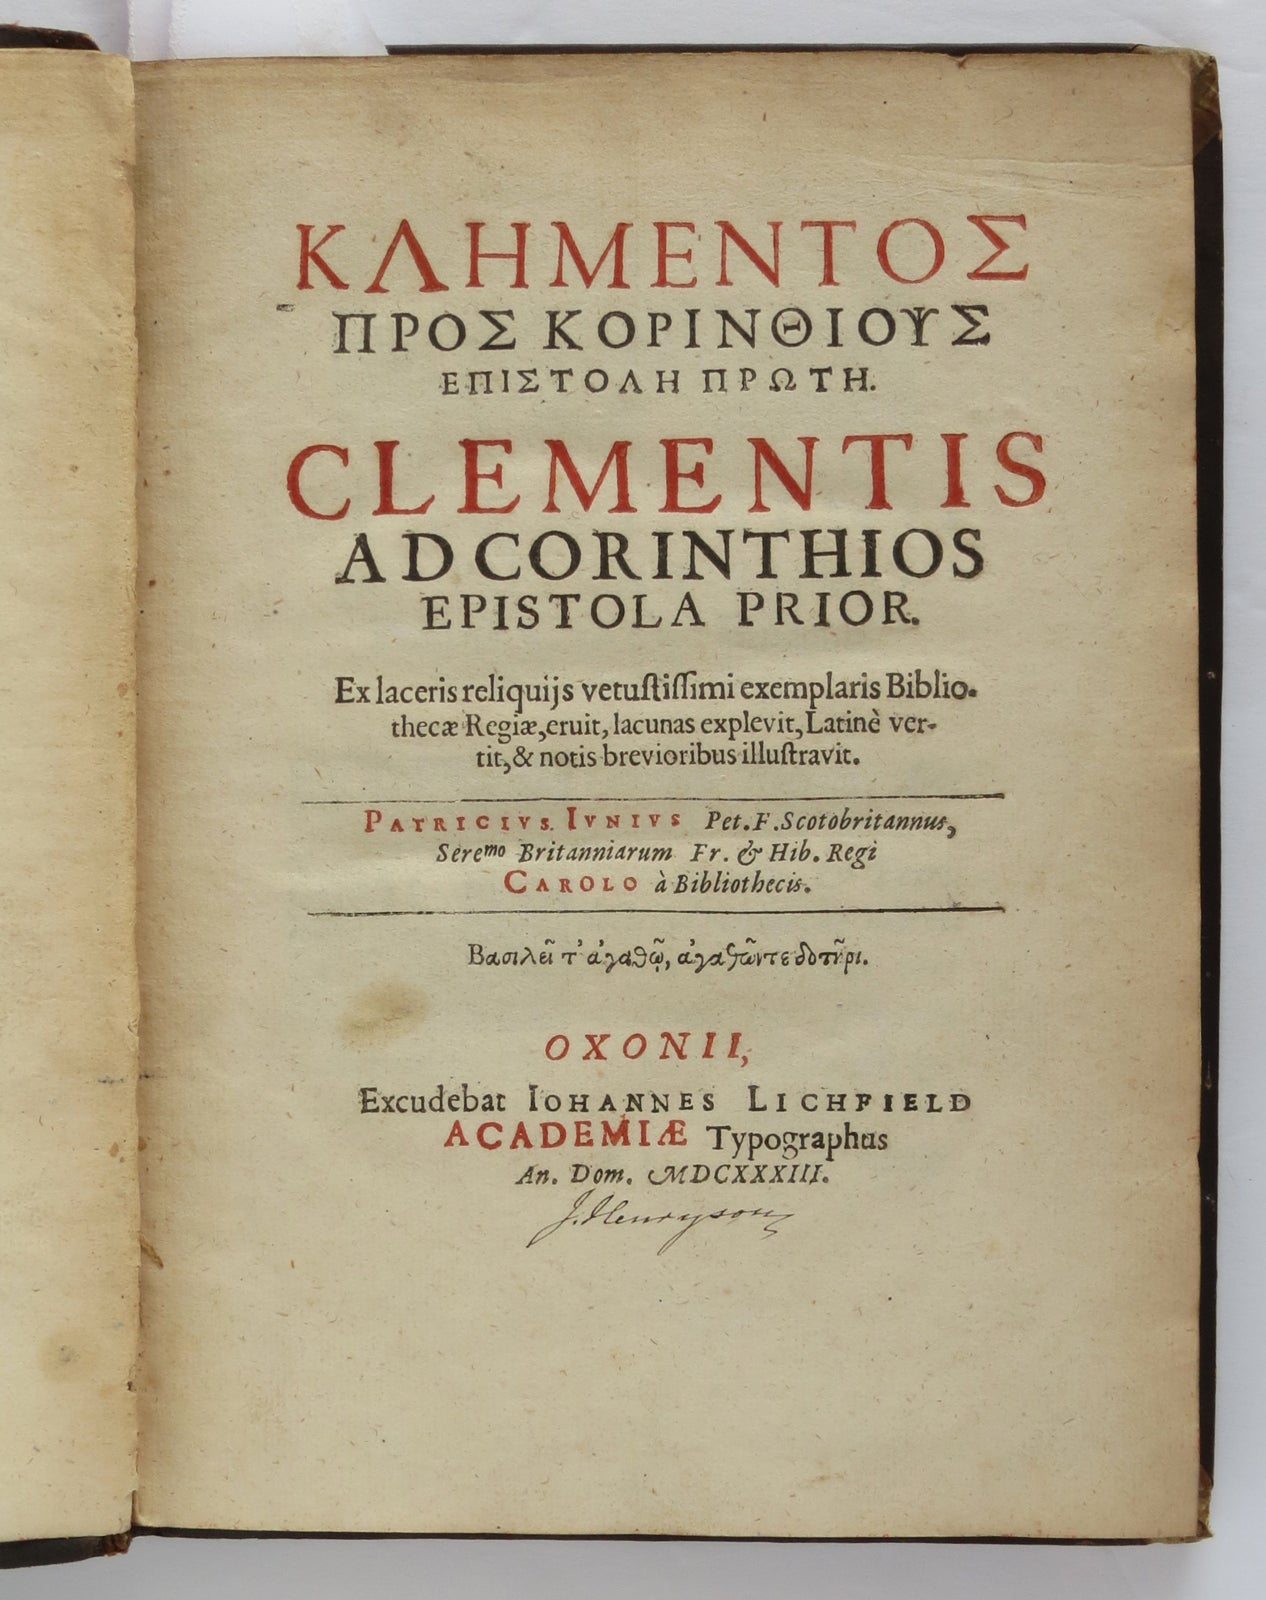 [Title in Greek] Clementis ad Corinthios Epistola Prior. Pope Clement I.